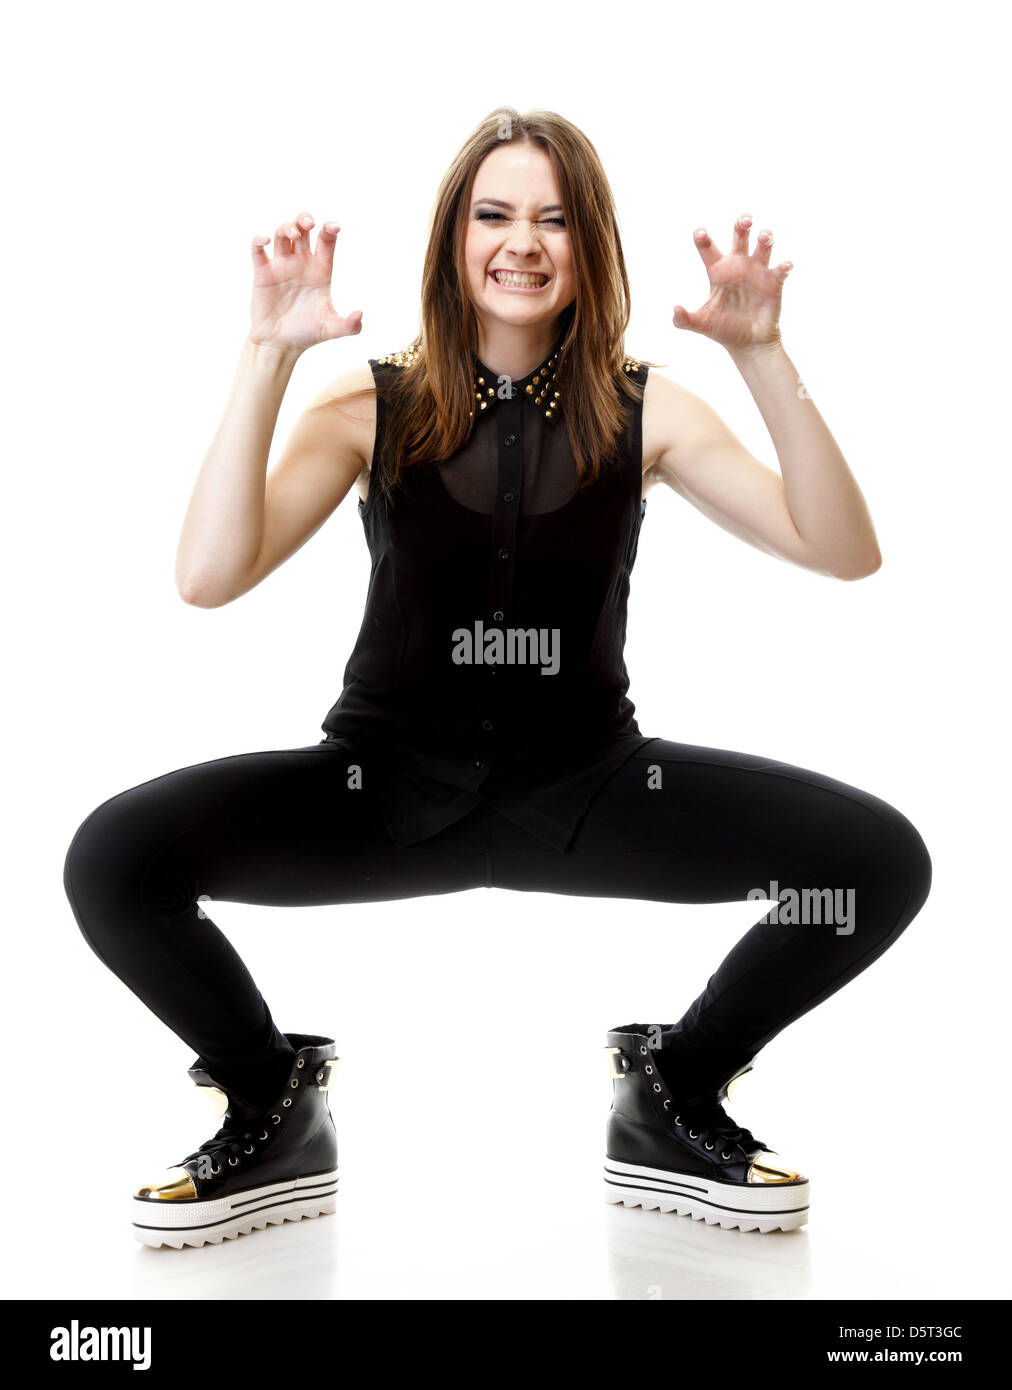 Grimacing. Full length young angry woman making silly face on white background Stock Photo